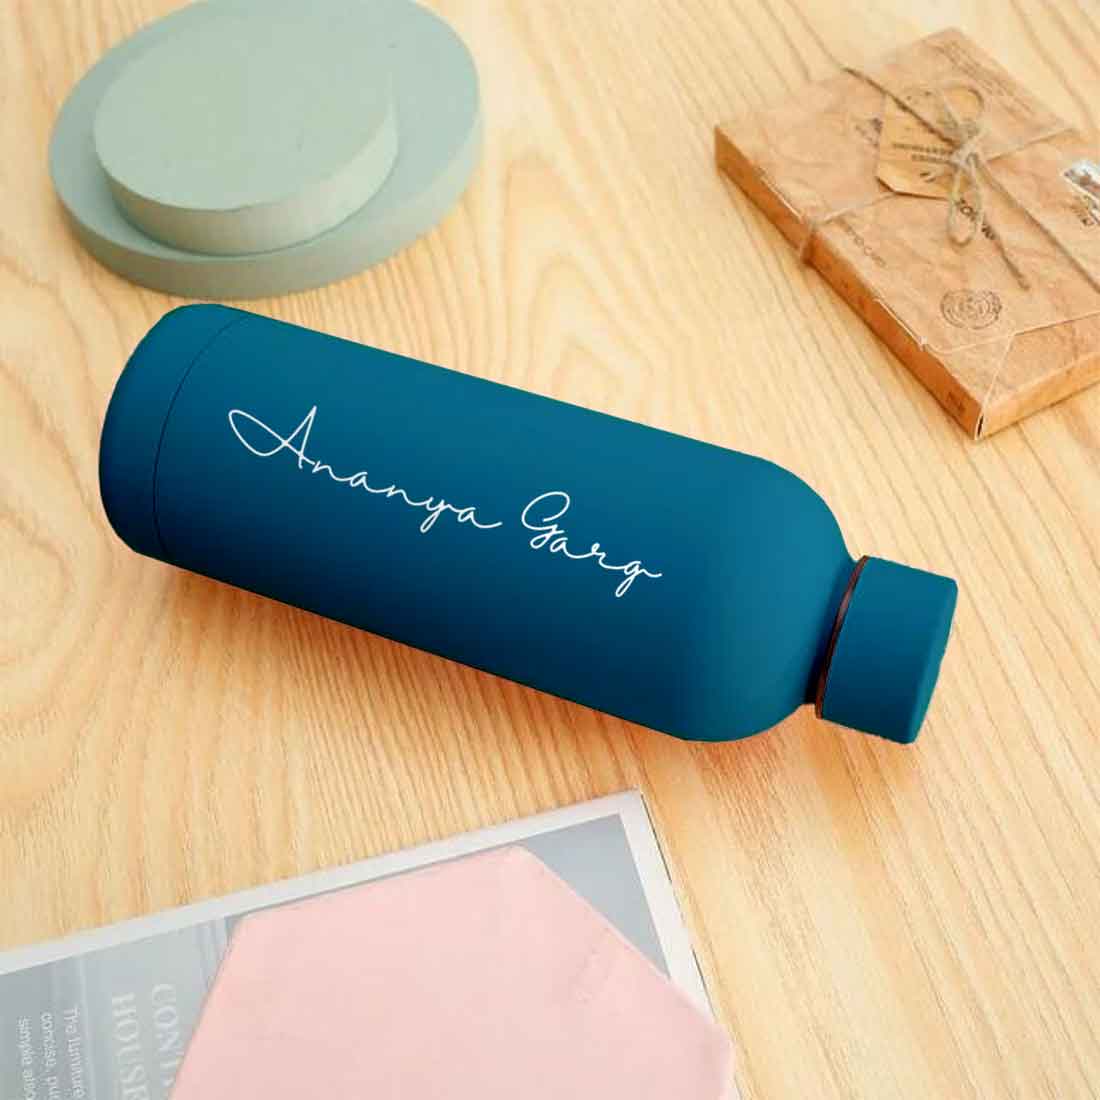 Double Insulated Water Bottle with Name 500ml Stainless Steel Bottles for Office Home Travel- BPA Free, Leakproof